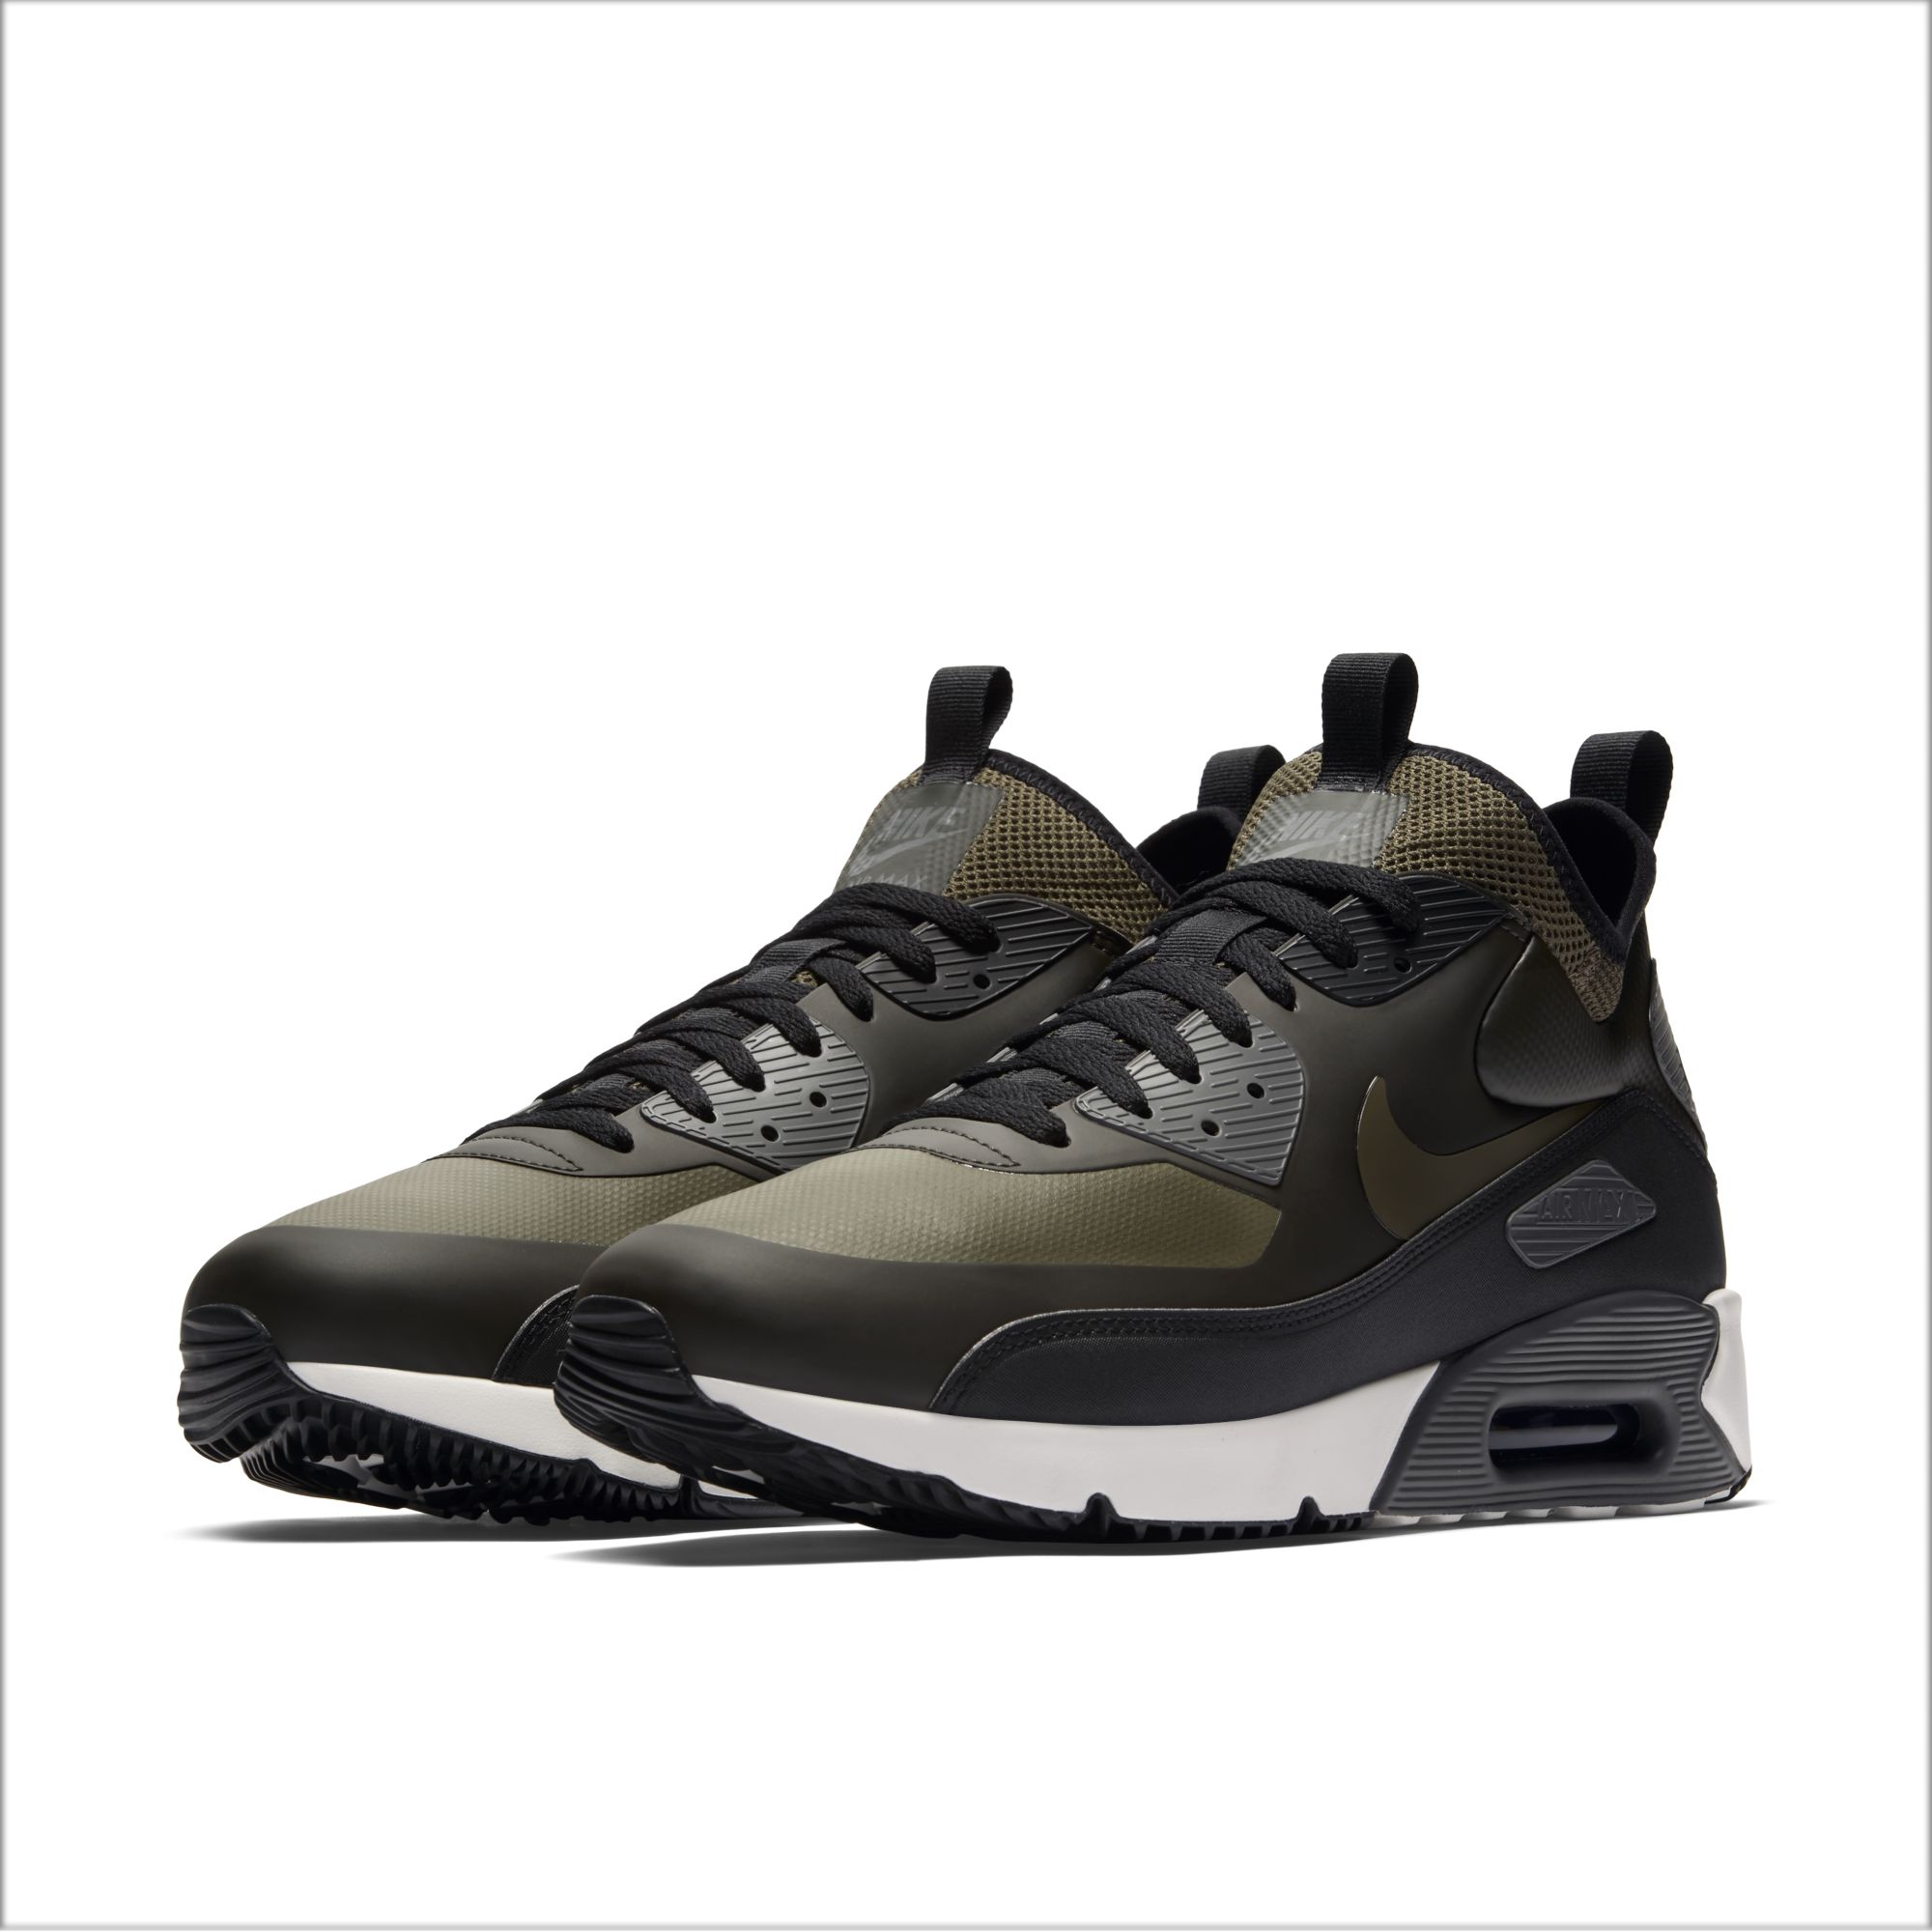 These Nike Air Max 90 Ultra Mids Get 